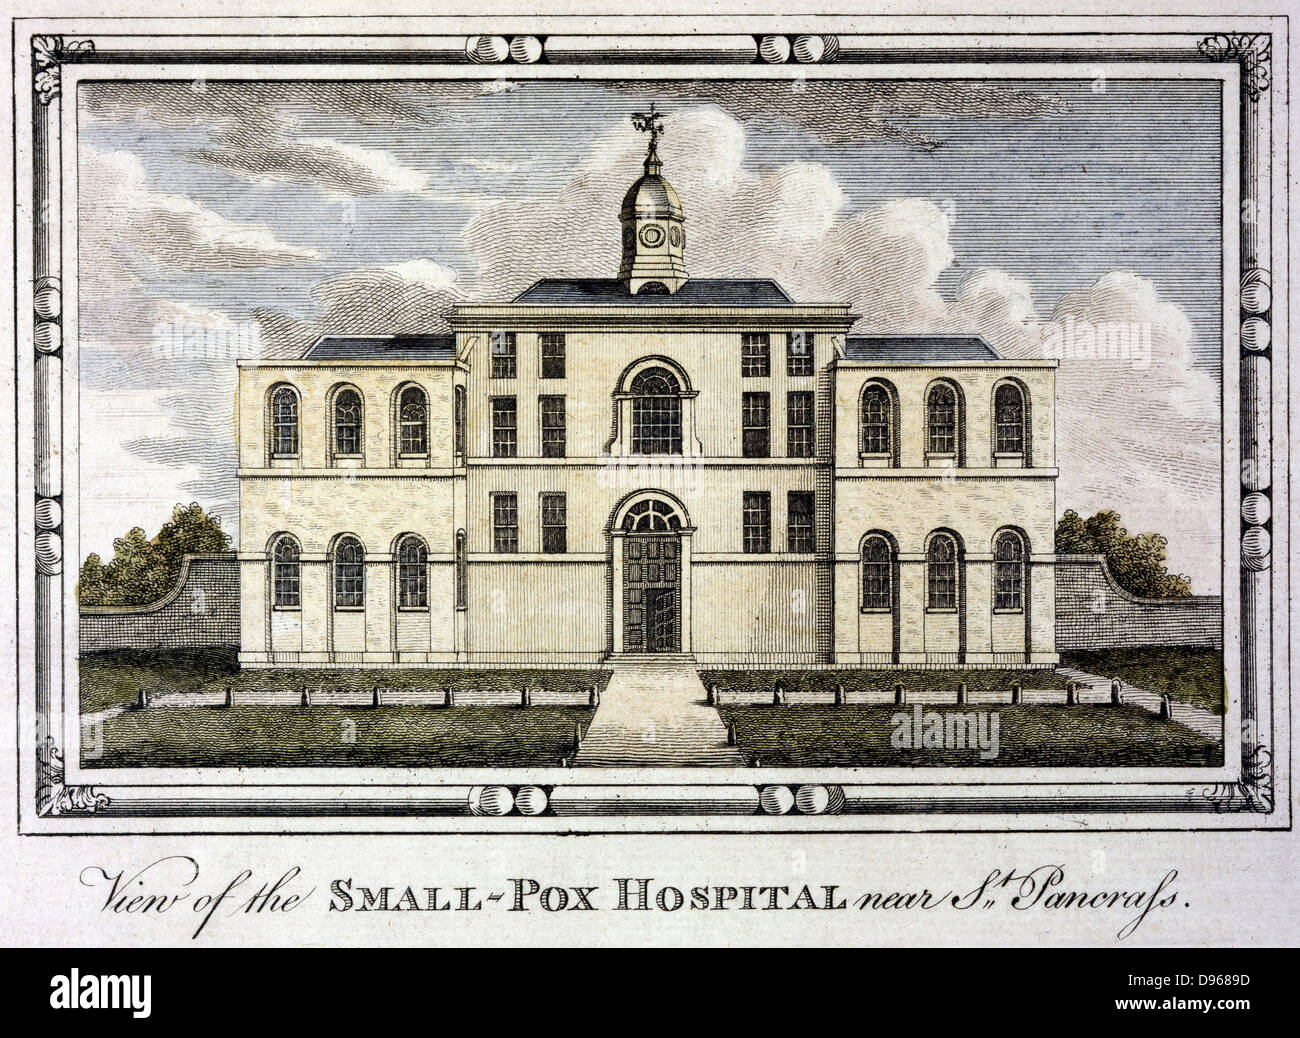 Smallpox Hospital, St Pancras, London c1800. Fever (isolation) hospitals for highly infectious diseases built outside cities. At this time, before rapid expansion of London, St Pancras was a rural village. Engraving. Stock Photo